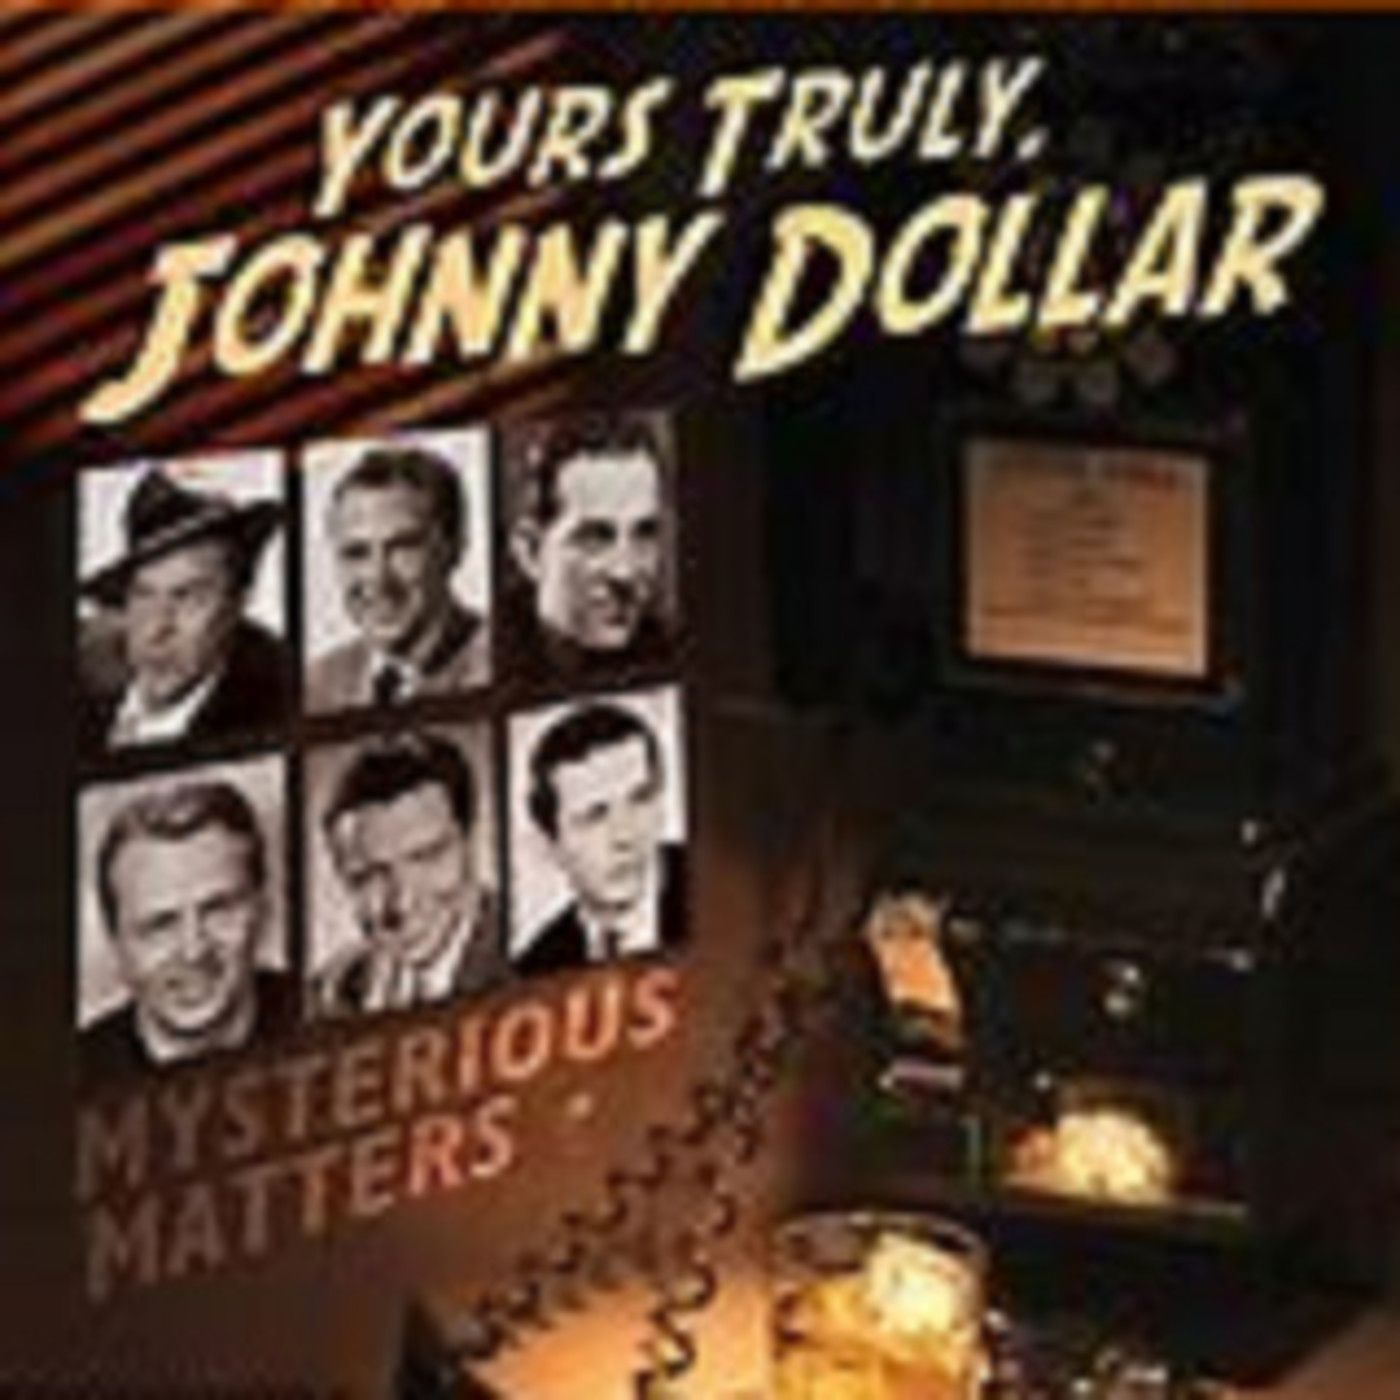 Yours Truly, Johnny Dollar - 081460, episode 701 - The Paradise Lost Matter